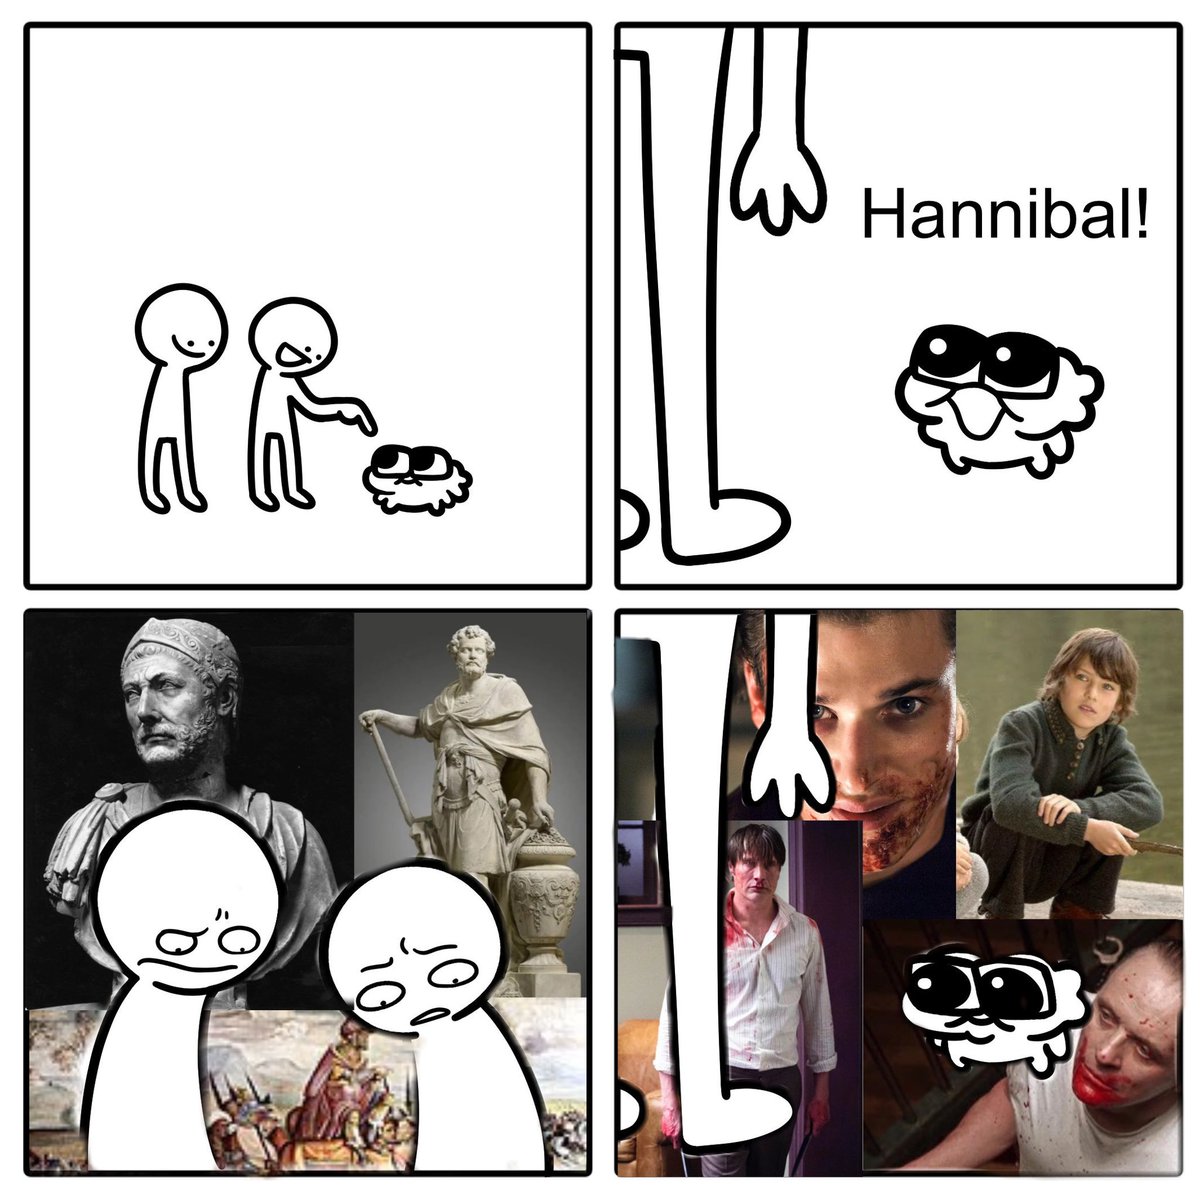 Not Hannibal the great. I mean Hannibal the cannibal Lecter 😔😔